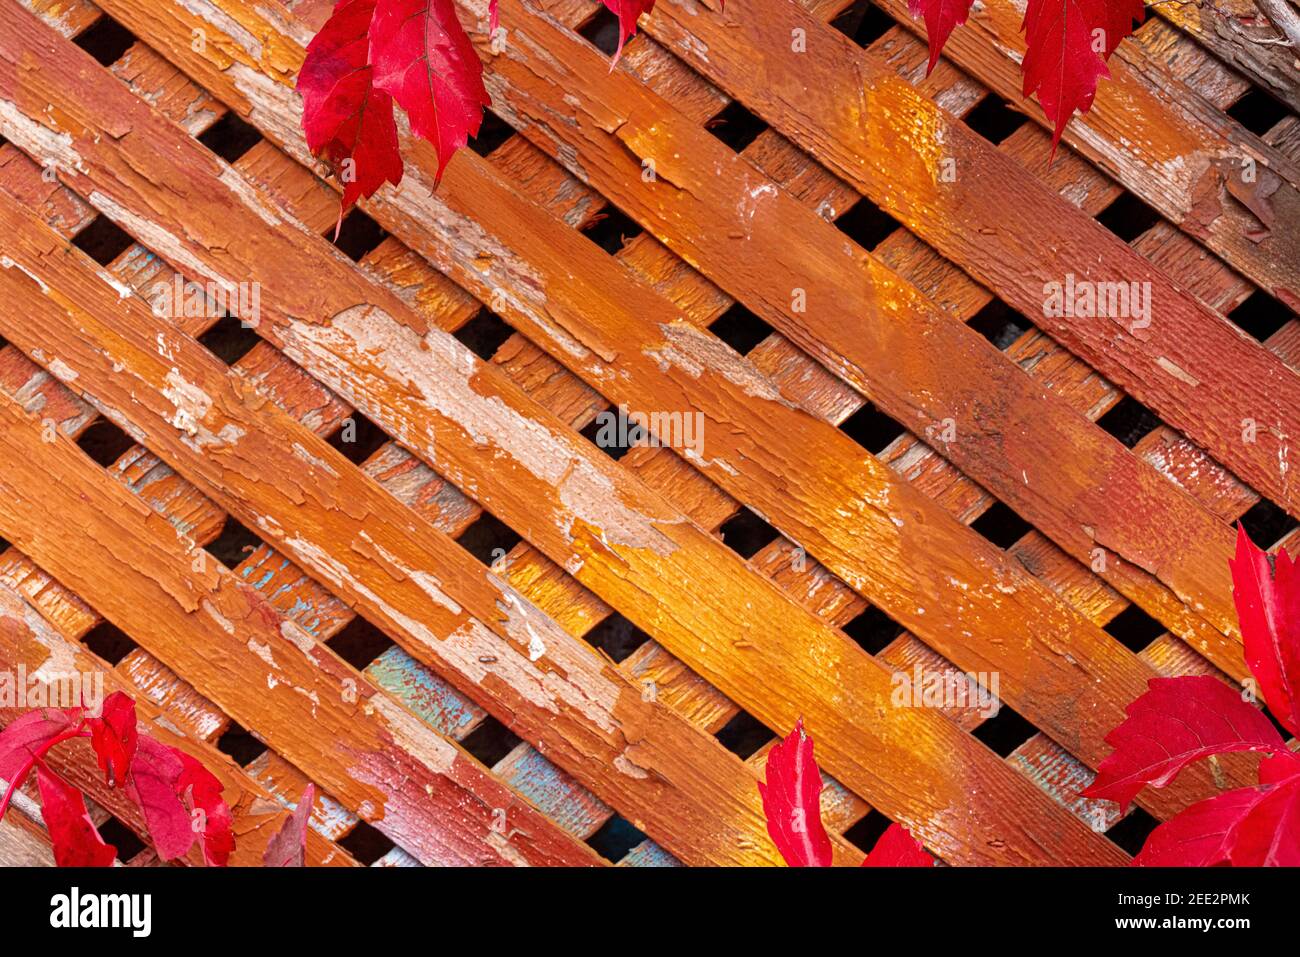 Red Leaves Wood Lattice Garden Wall Stock Photo